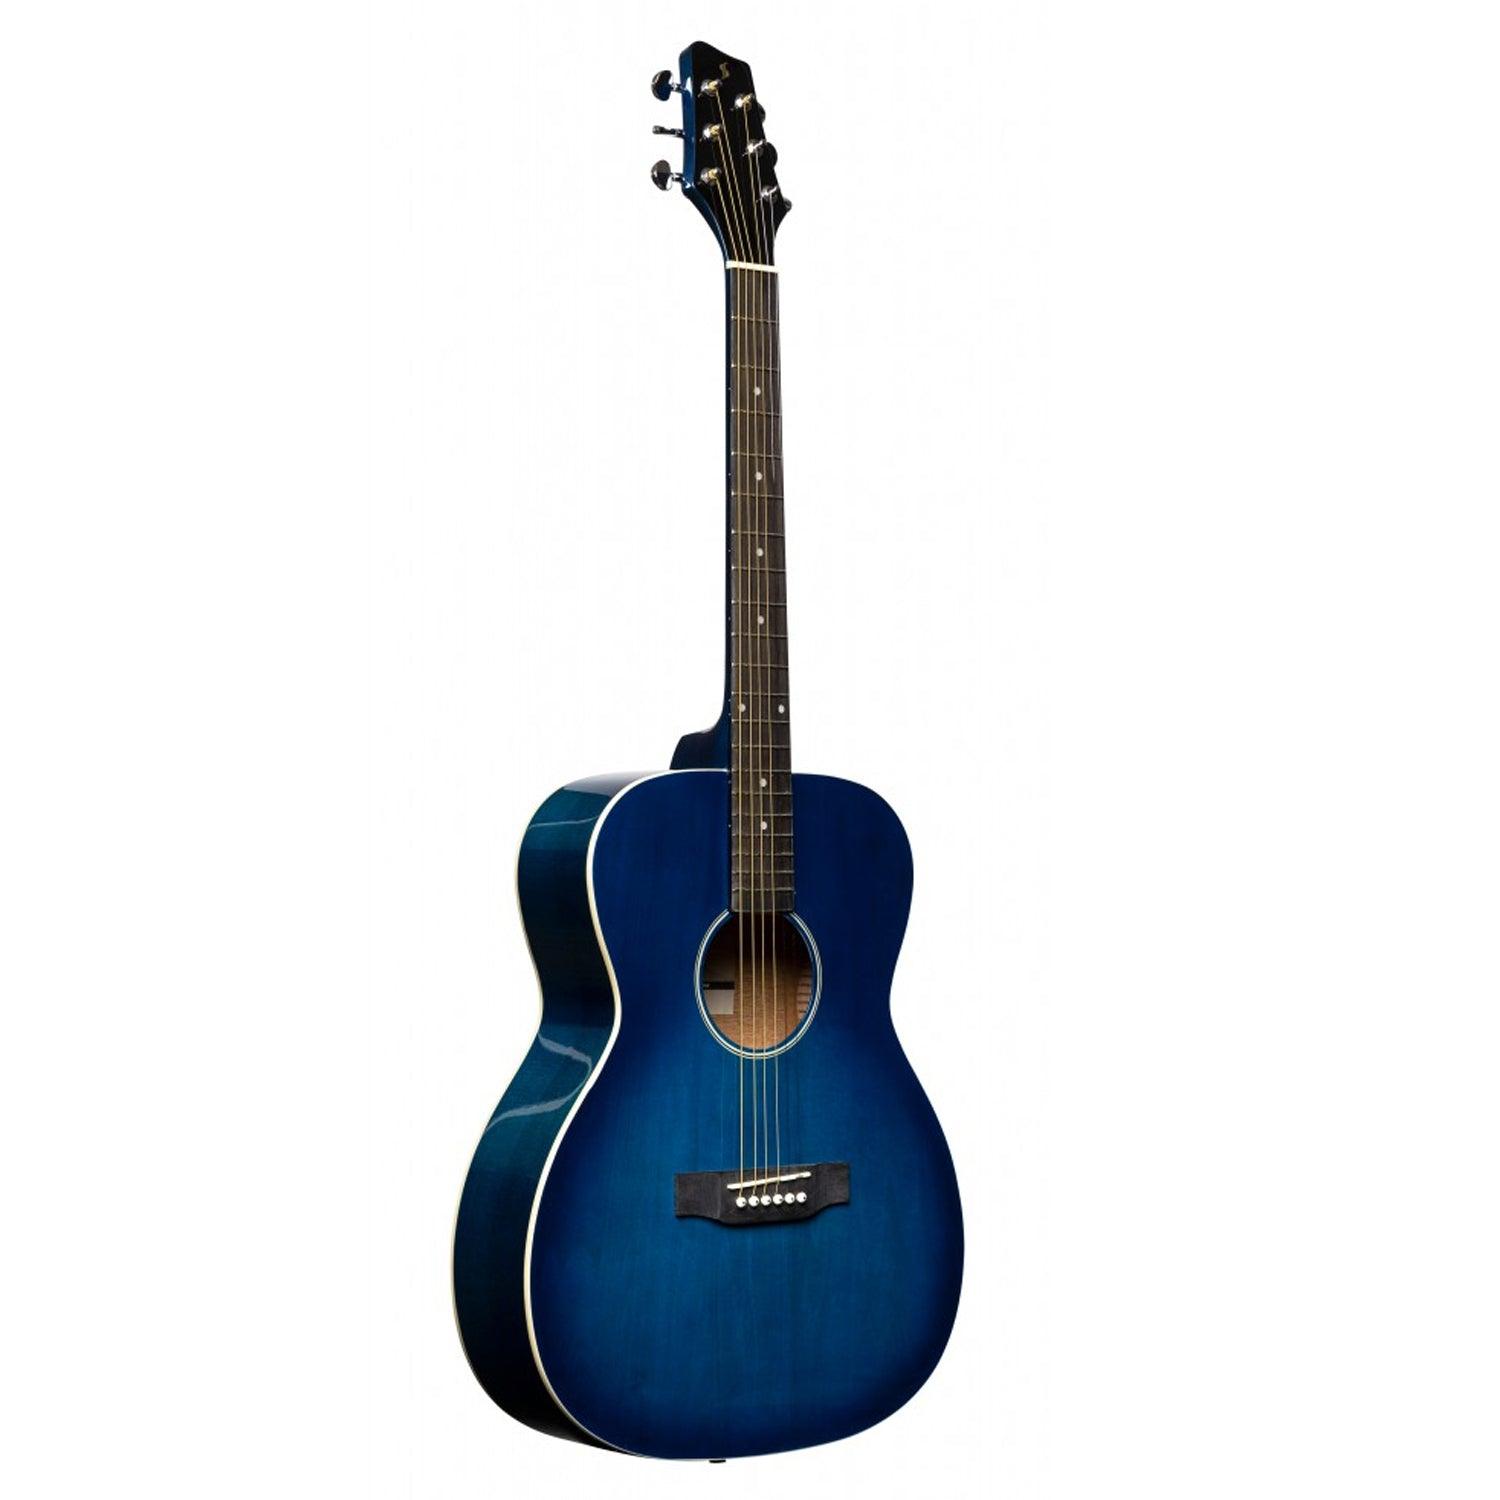 Stagg SA35 A-TB Blue Auditorium Guitar with Basswood Top - DY Pro Audio